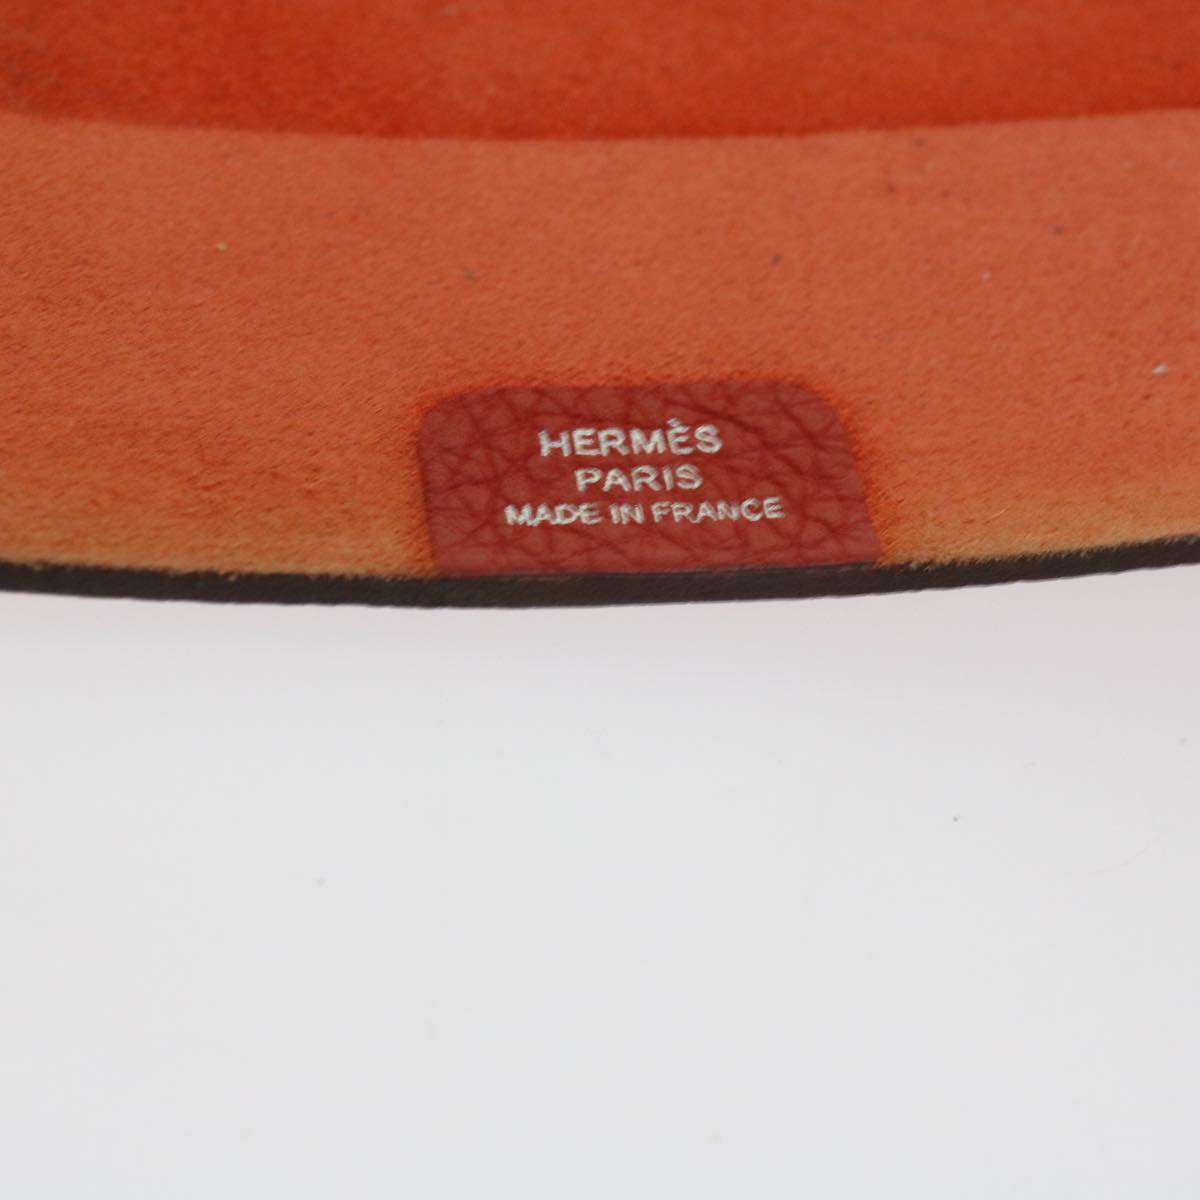 HERMES Wallet Note Cover Leather 2Set Red Black Auth bs10810